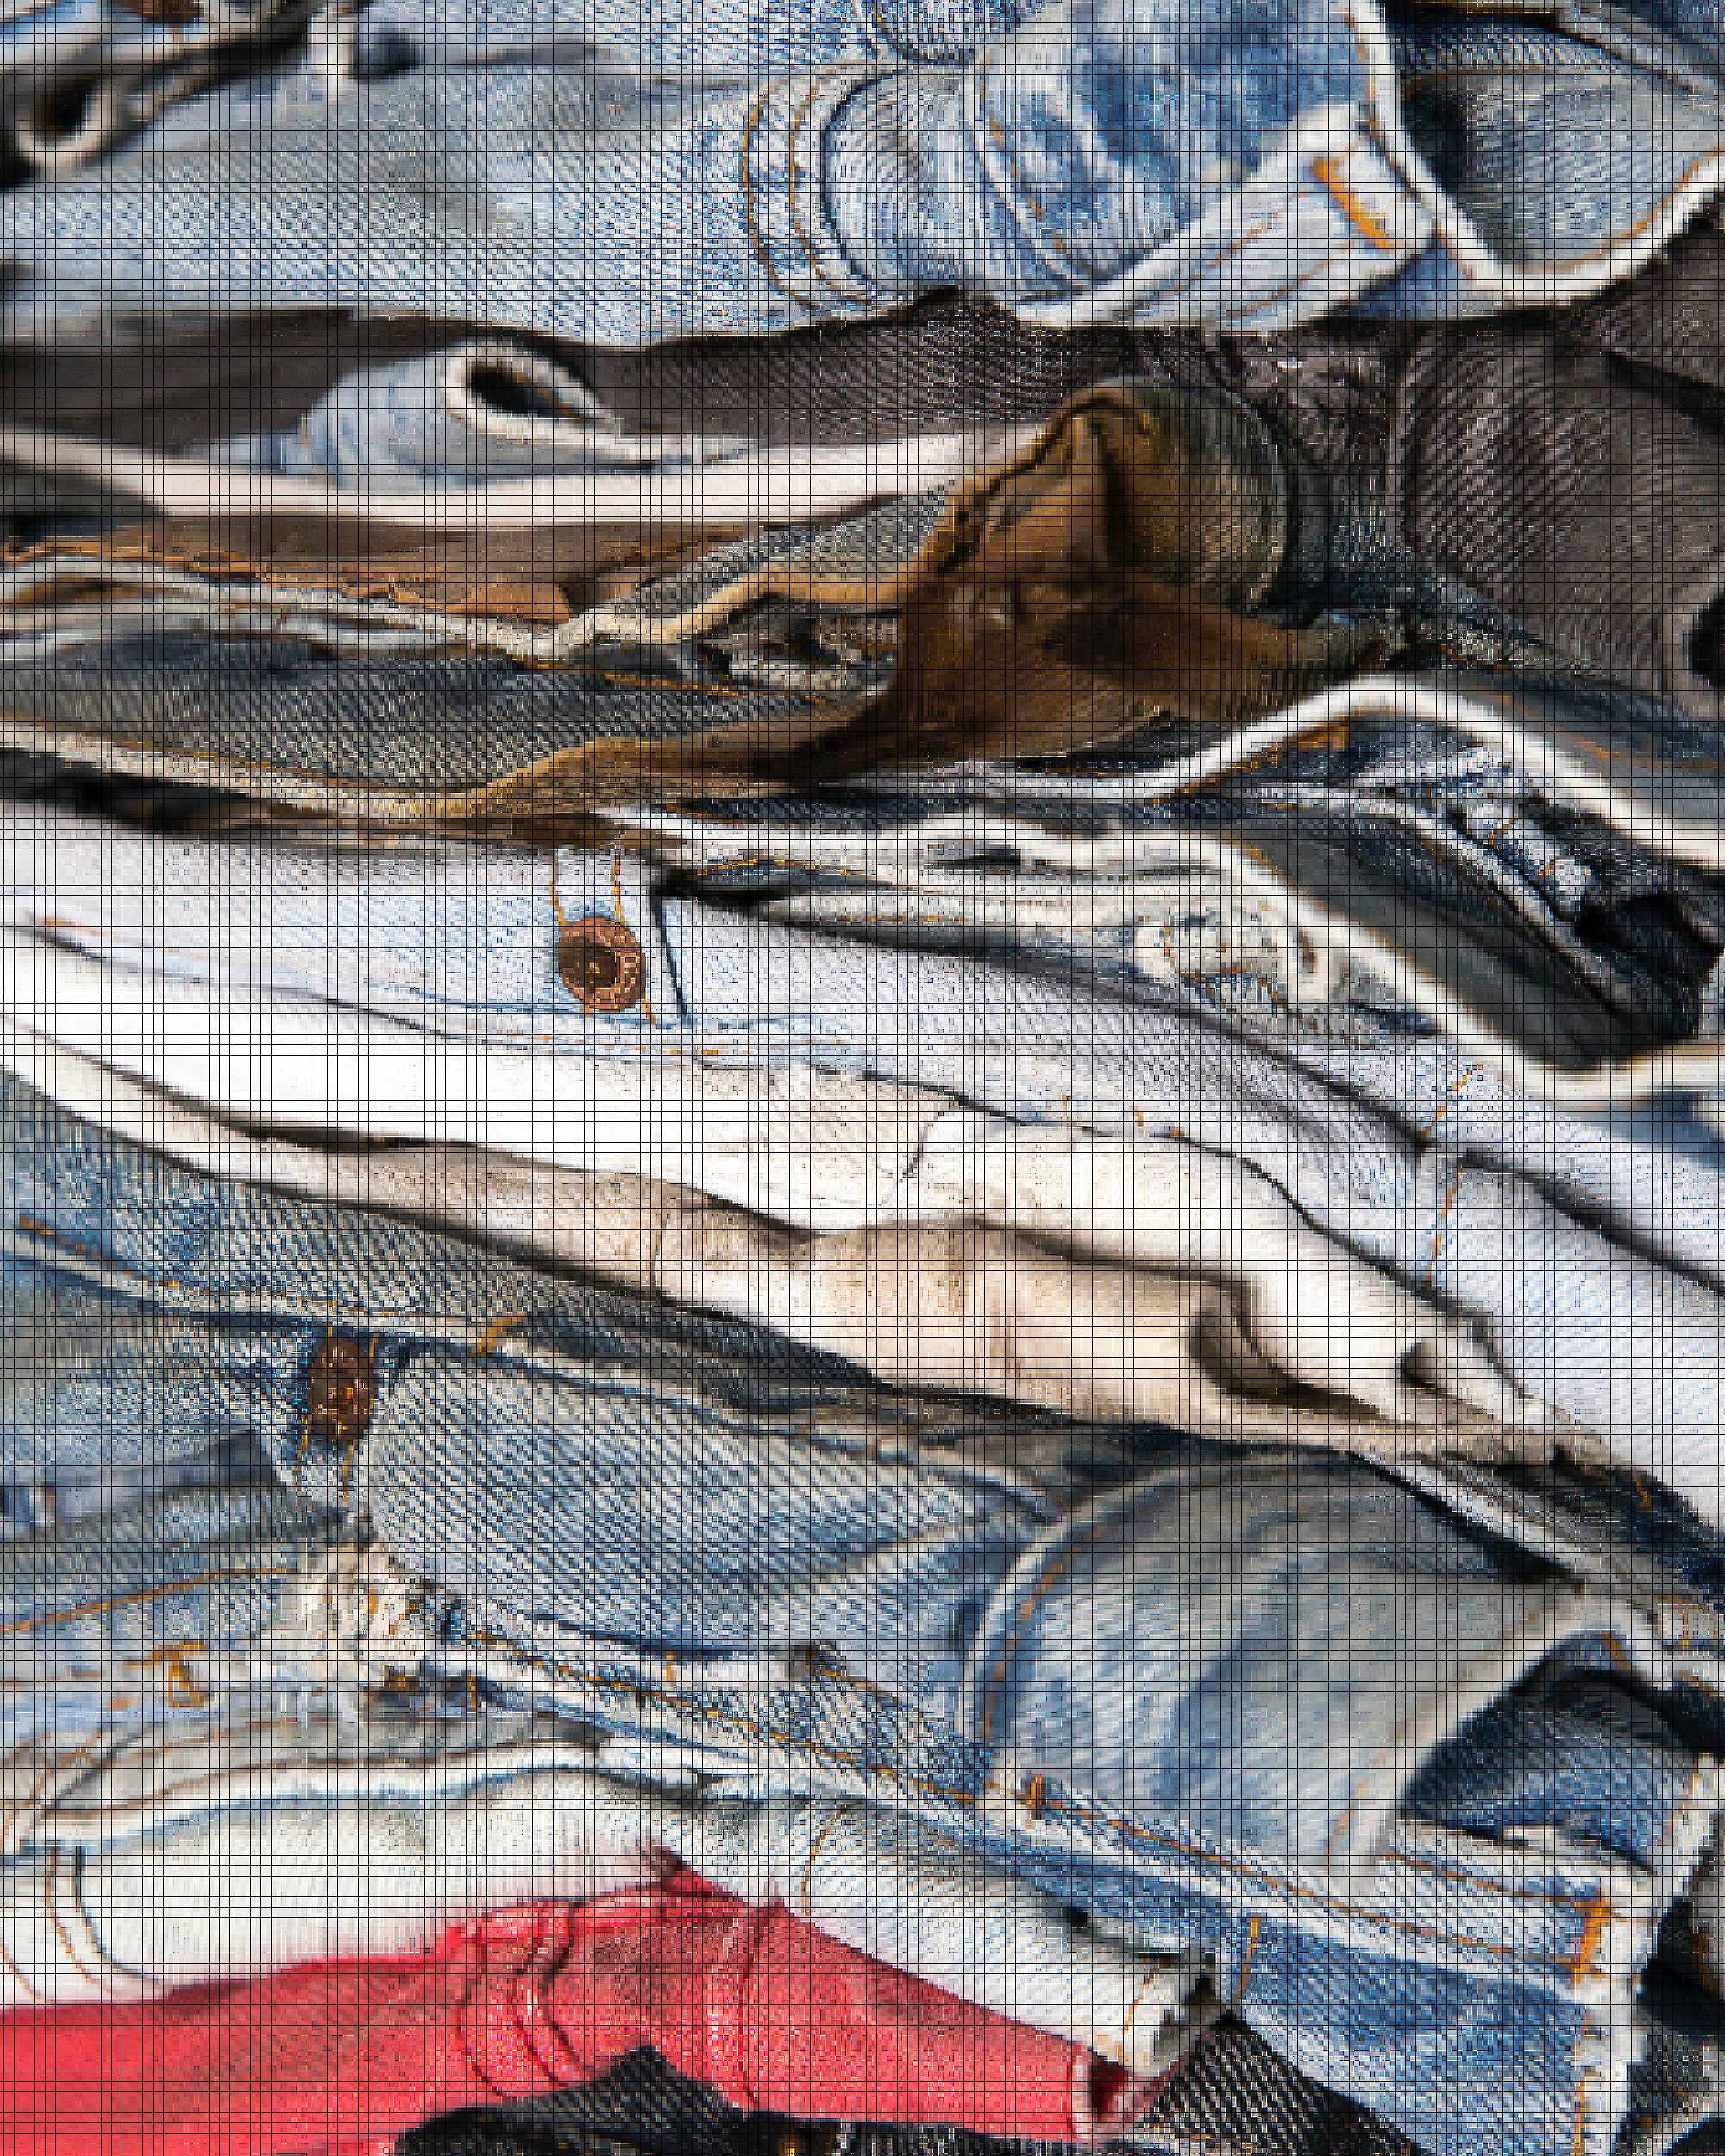 Jeans folded stacked on top of each other.